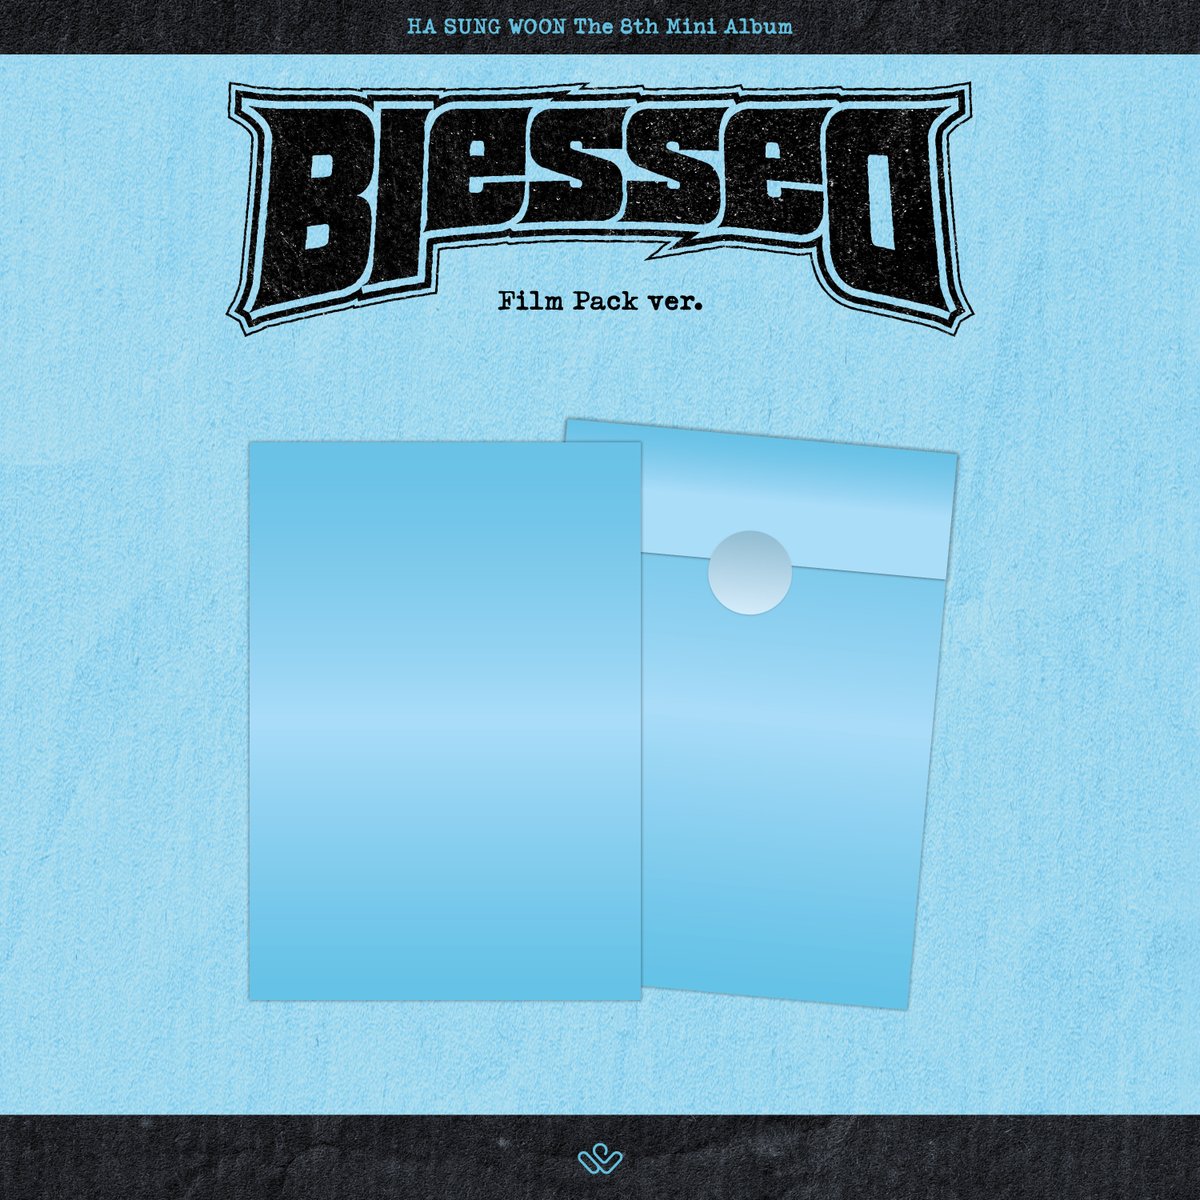 HA SUNG WOON - BLESSED (THE 8TH MINI ALBUM) FILM PACK VER.